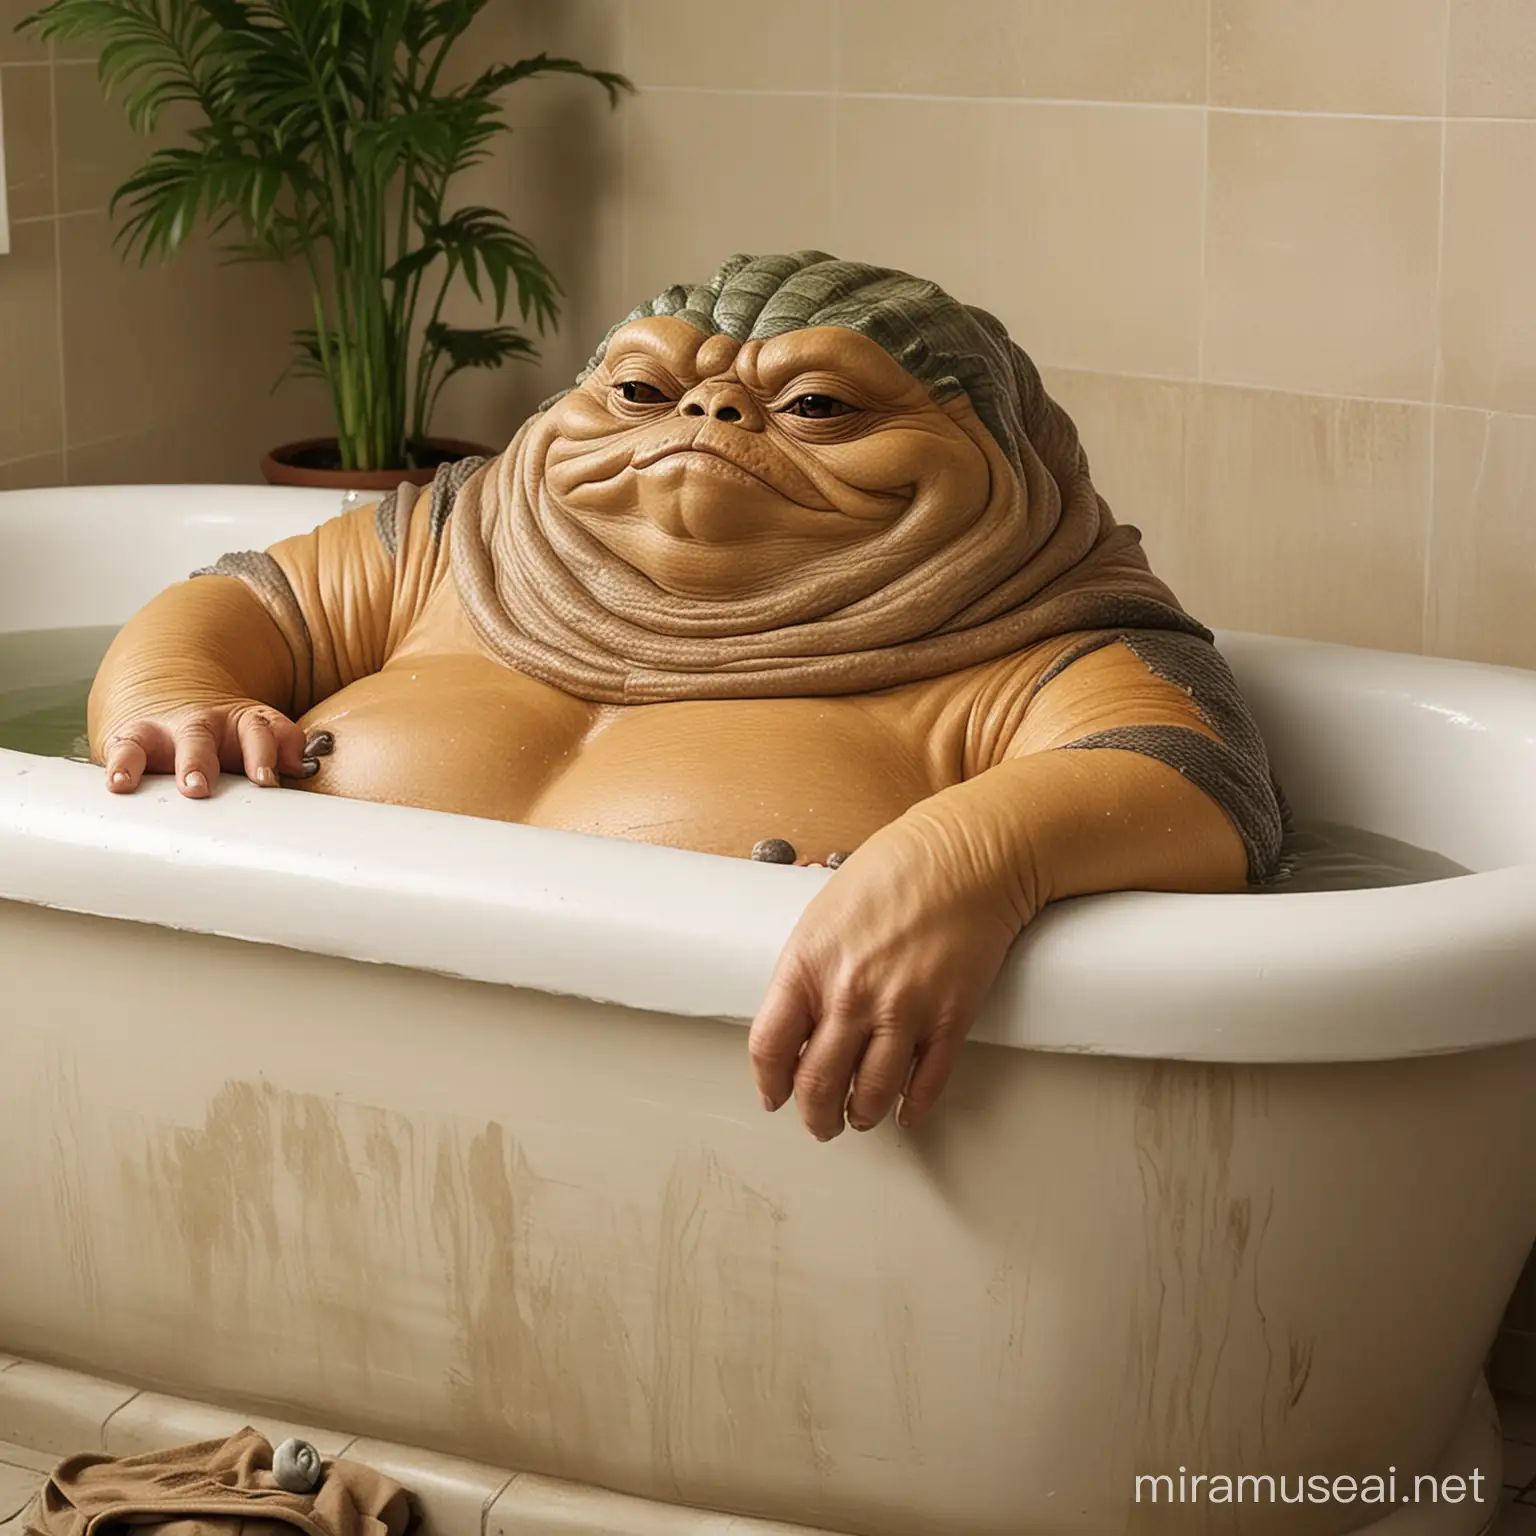 Despite her formidable stature, Jabba the Hutt finds herself grappling with an unexpected foe on her journey: back pain. Picture her reclining in a bathtub, the warm water offering a temporary respite from the ache. How does she appear, with her usual air of authority tempered by a hint of vulnerability? Perhaps there are specialized cushions or supports around her, hinting at the lengths she goes to maintain her comfort even in the midst of chaos. Explore this unique moment of vulnerability and strength as you bring this scene to life on paper